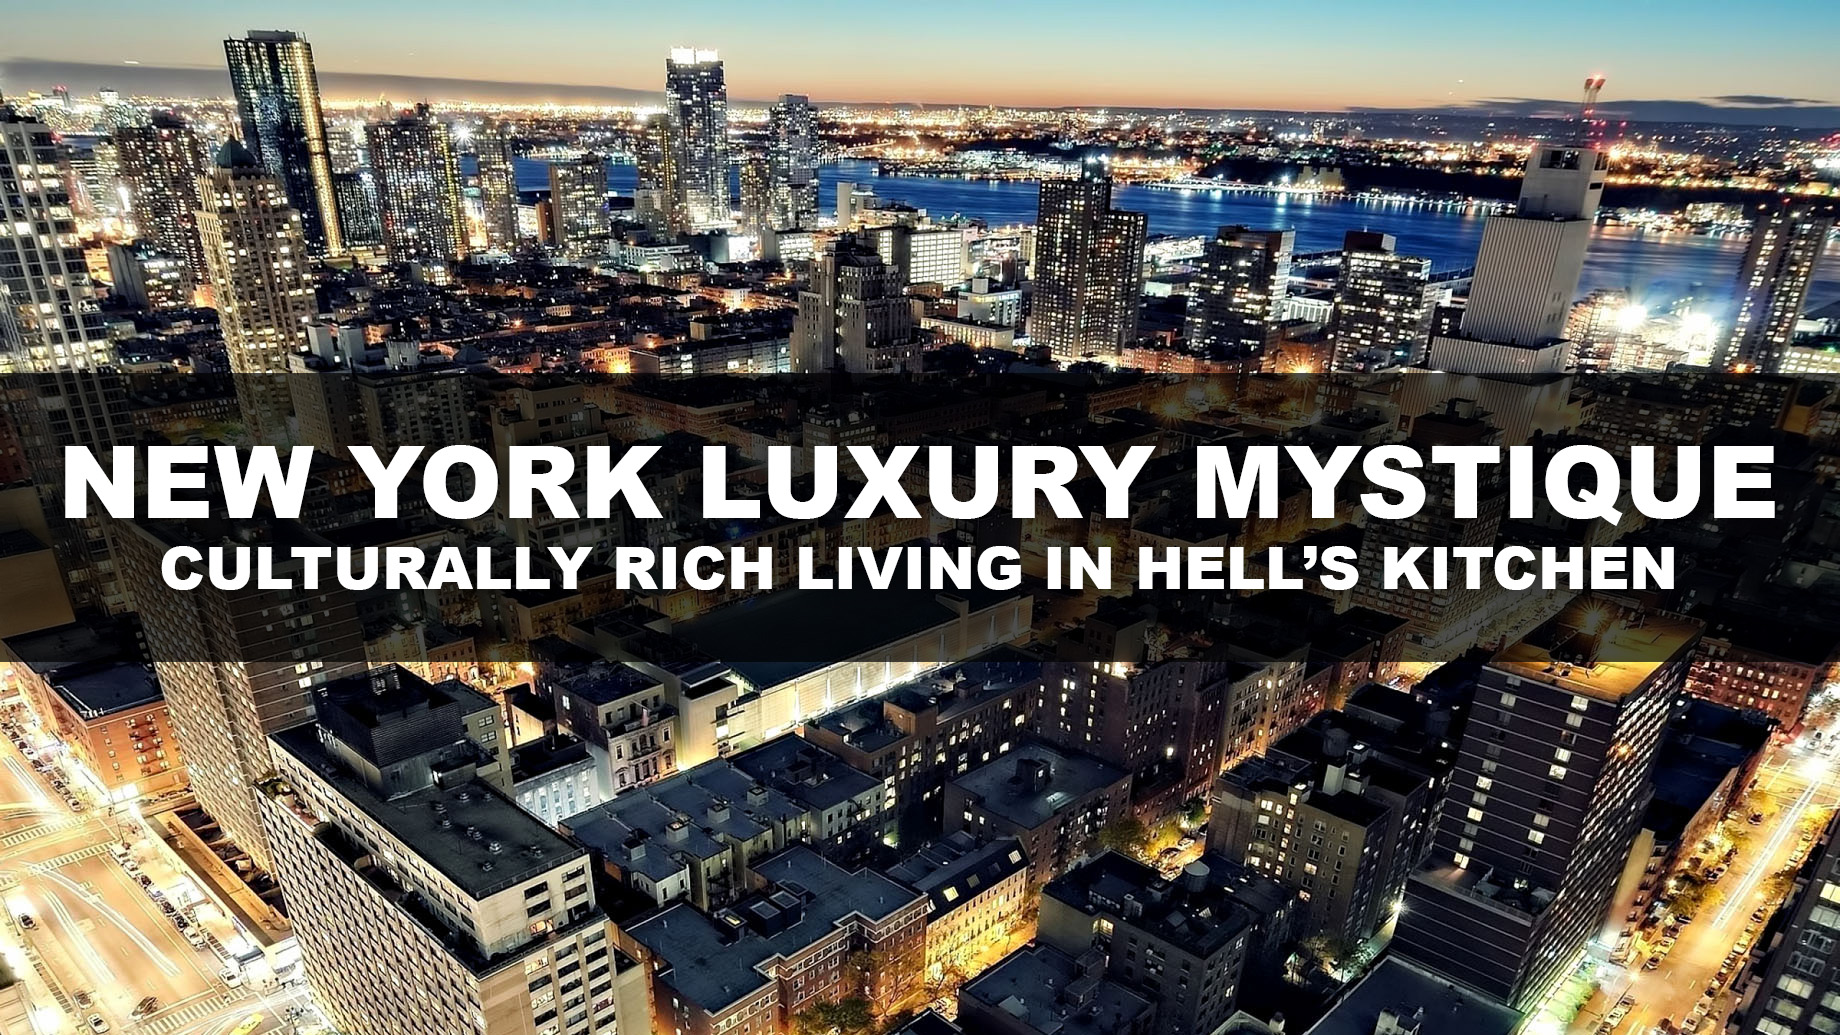 Luxury Mystique in New York - Culturally Rich Living in Hell’s Kitchen